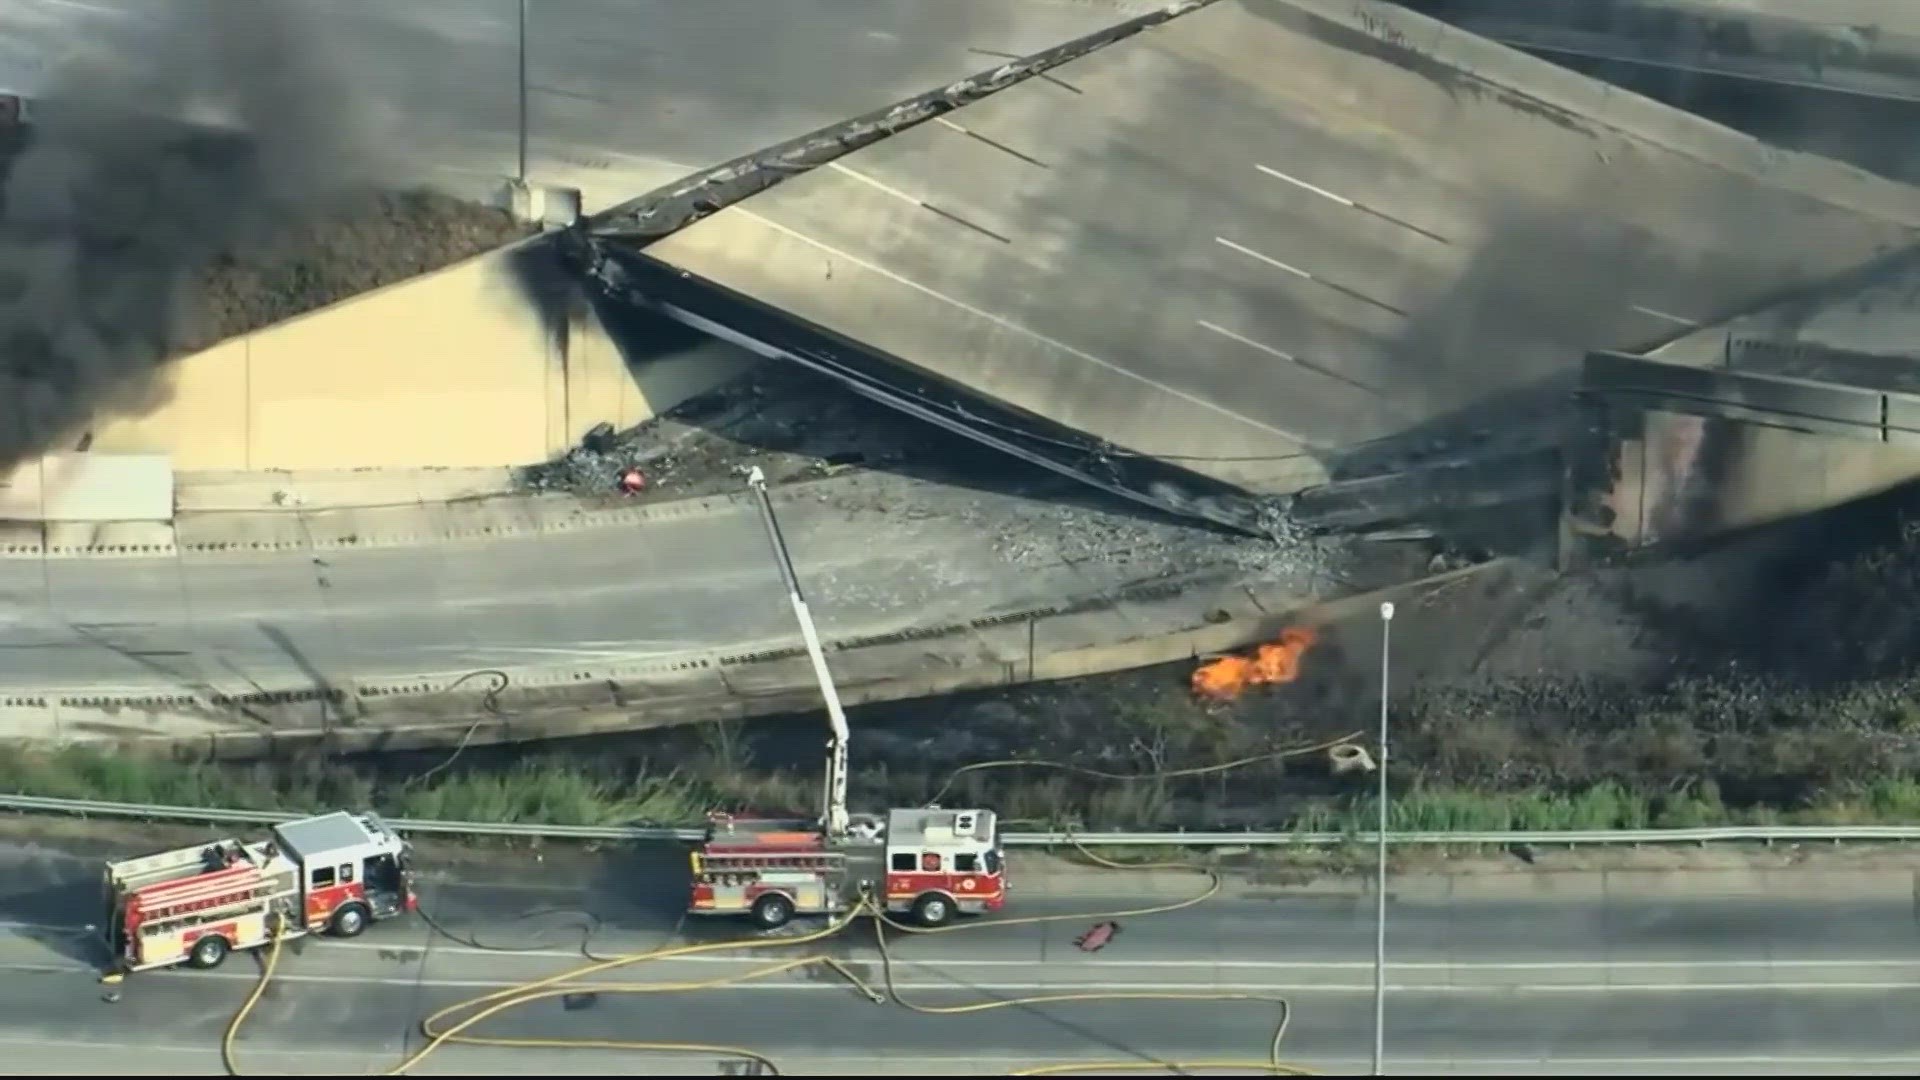 Drivers began longer commutes Monday after an elevated section of Interstate 95 collapsed in Philadelphia a day earlier following damage caused by a tanker truck car